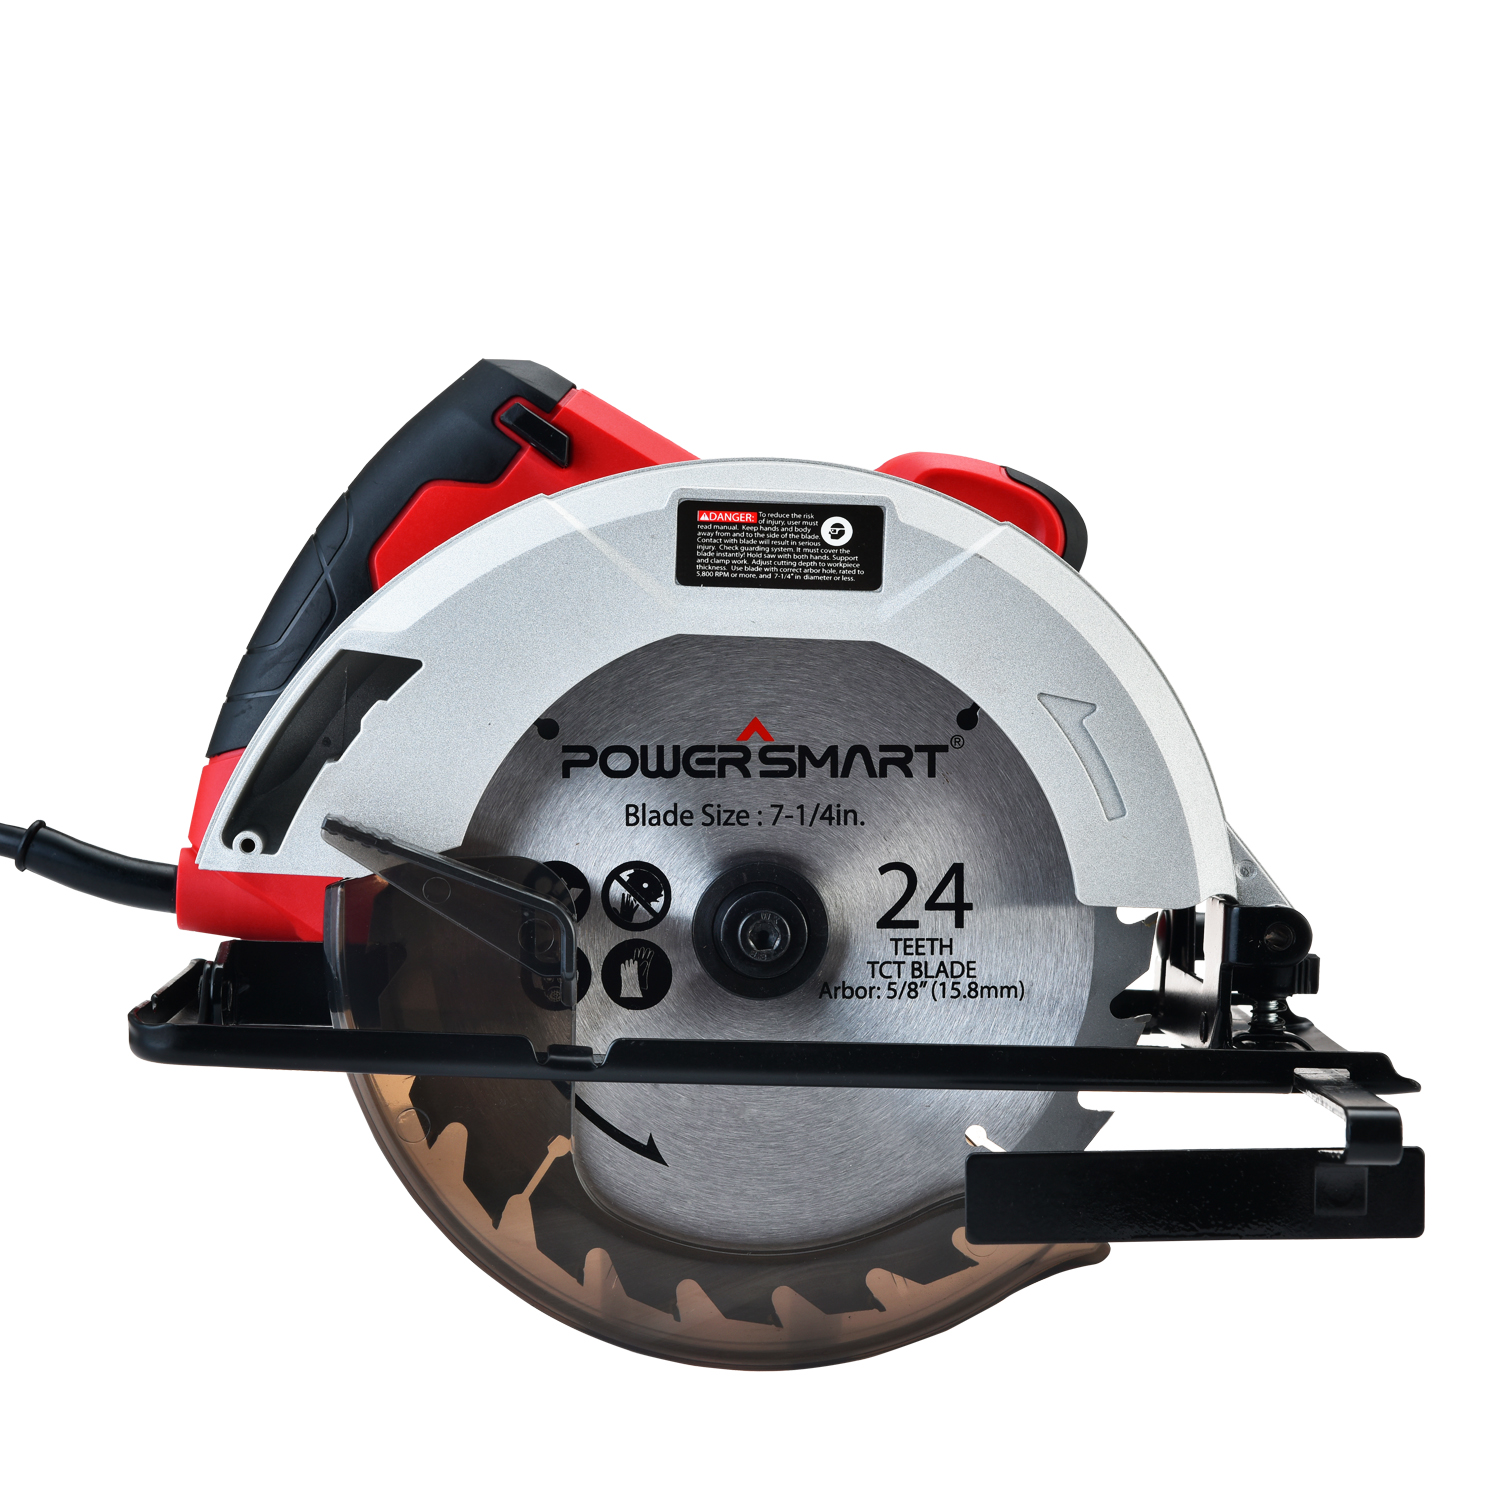 PowerSmart PS4015 7-1/4 in. 14 Amp Electric circular Saw - image 3 of 7